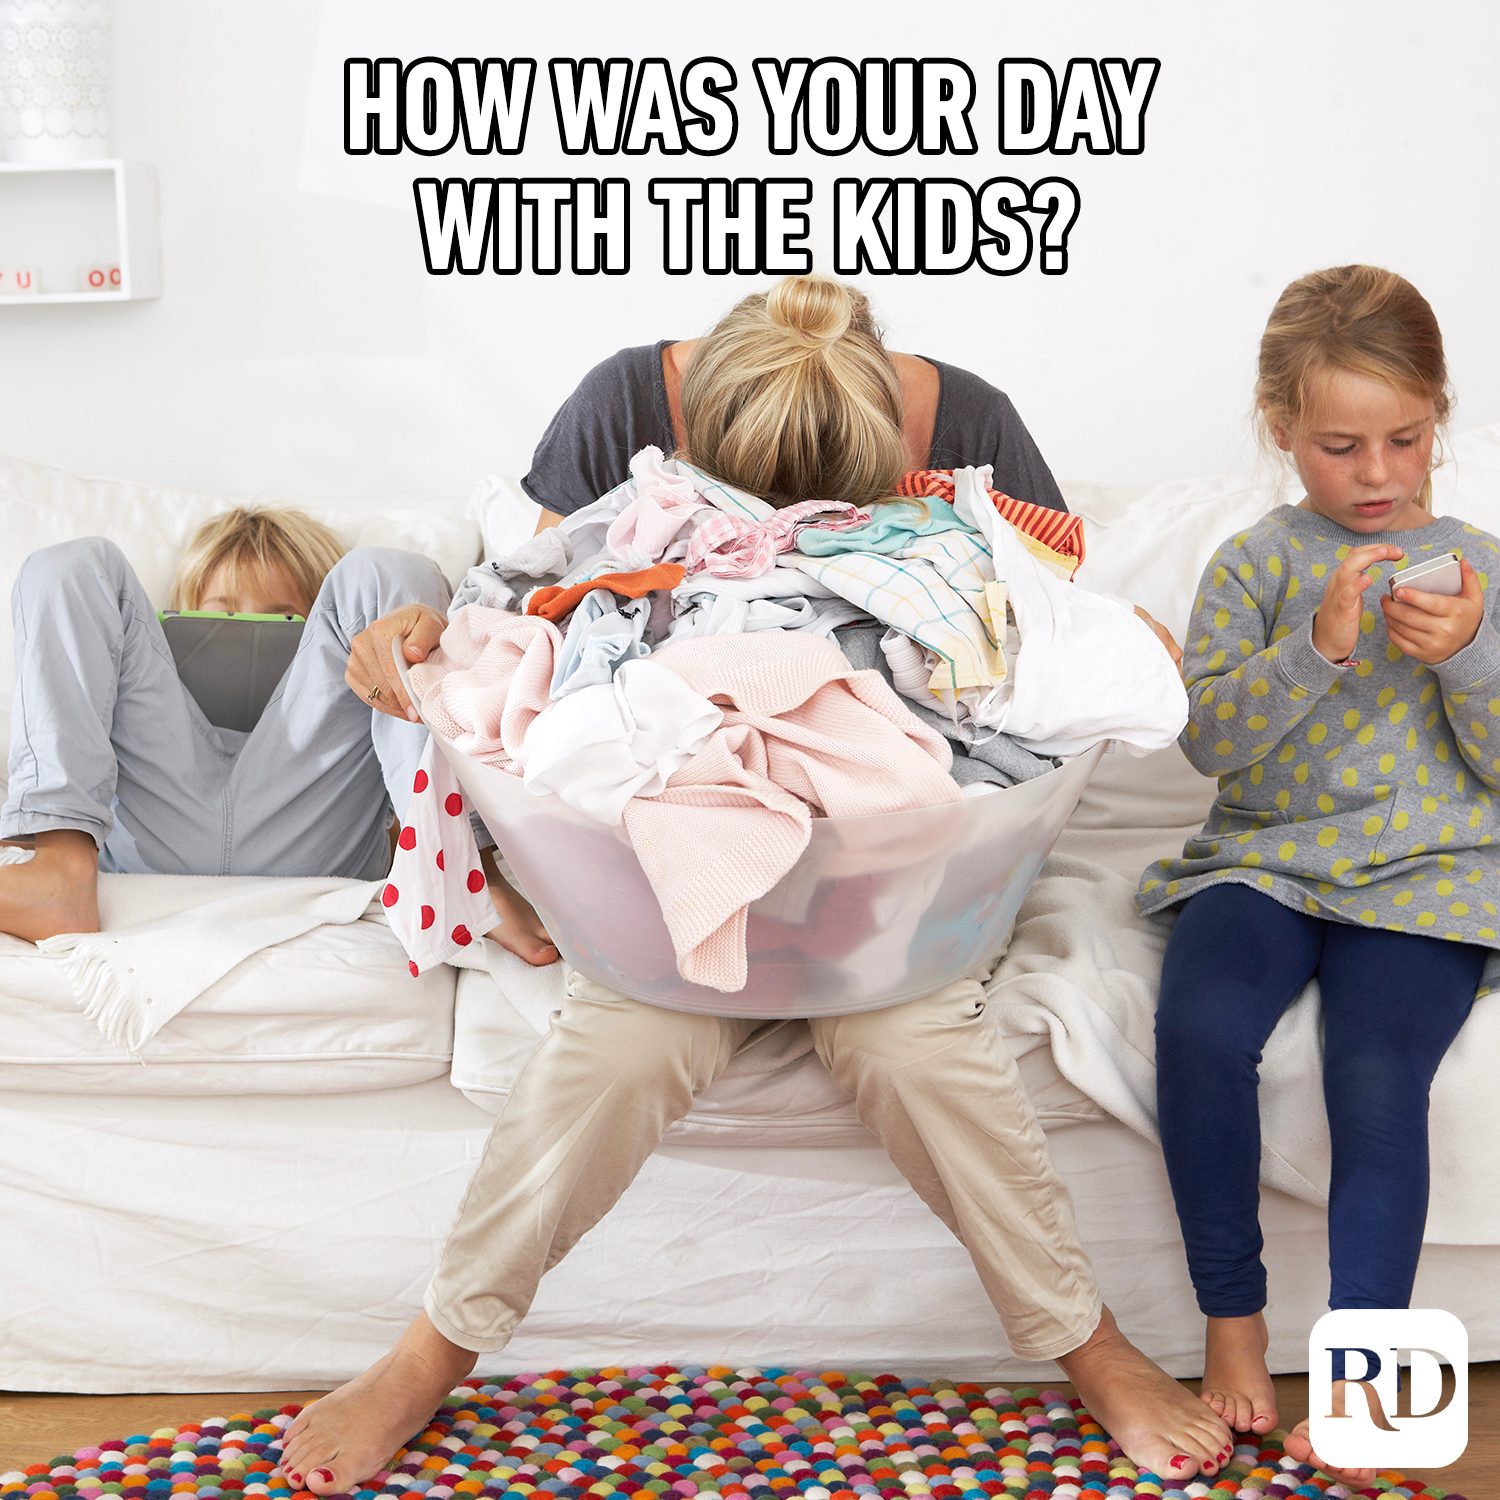 Woman face down in laundry basket MEME TEXT: How was your day with the kids?